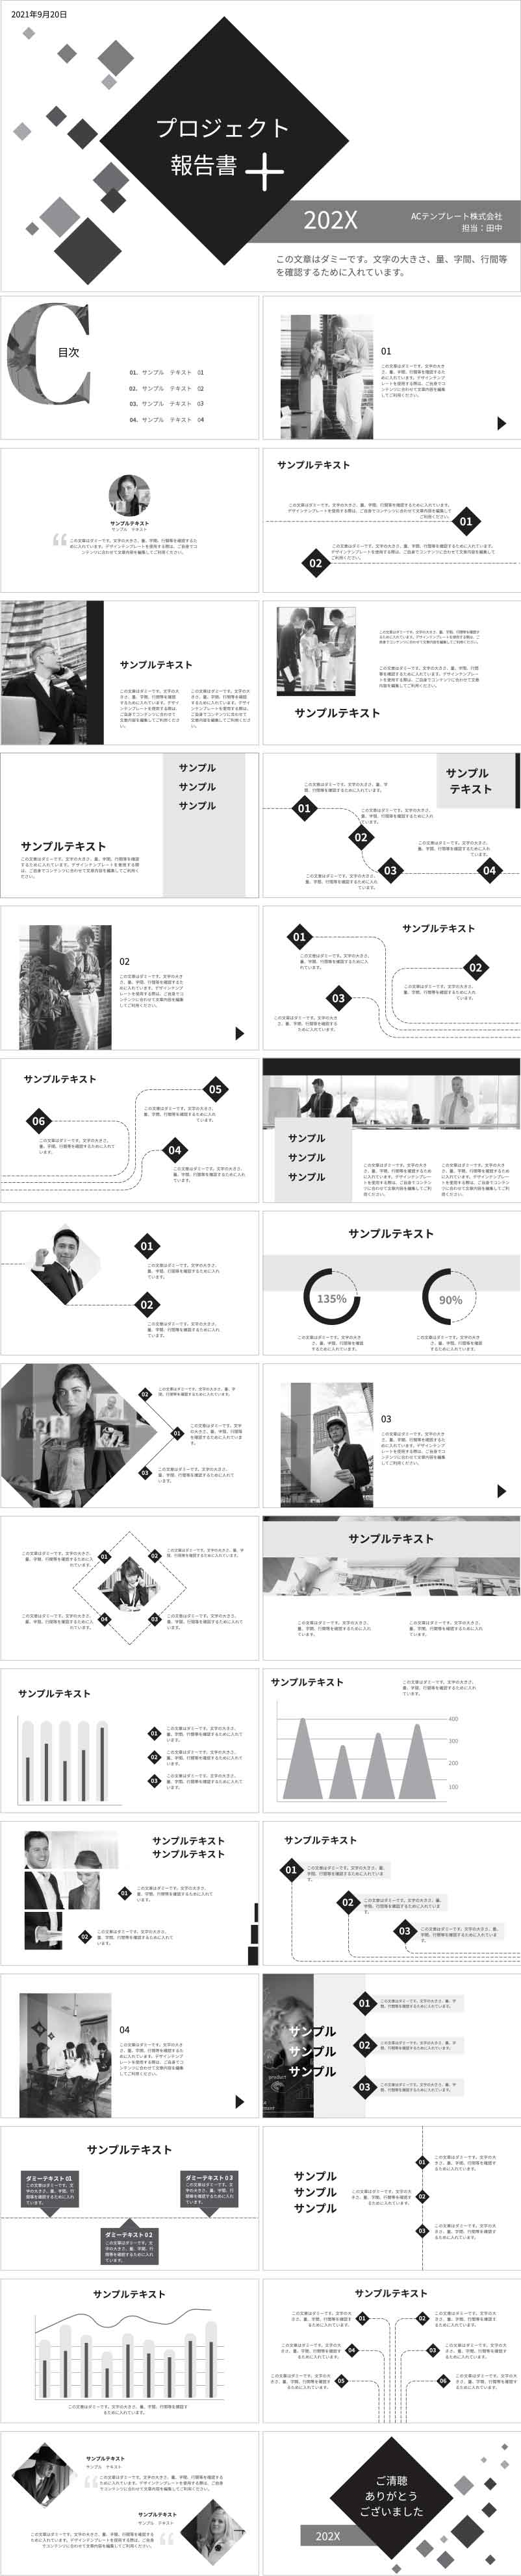 PowerPoint template vol.70